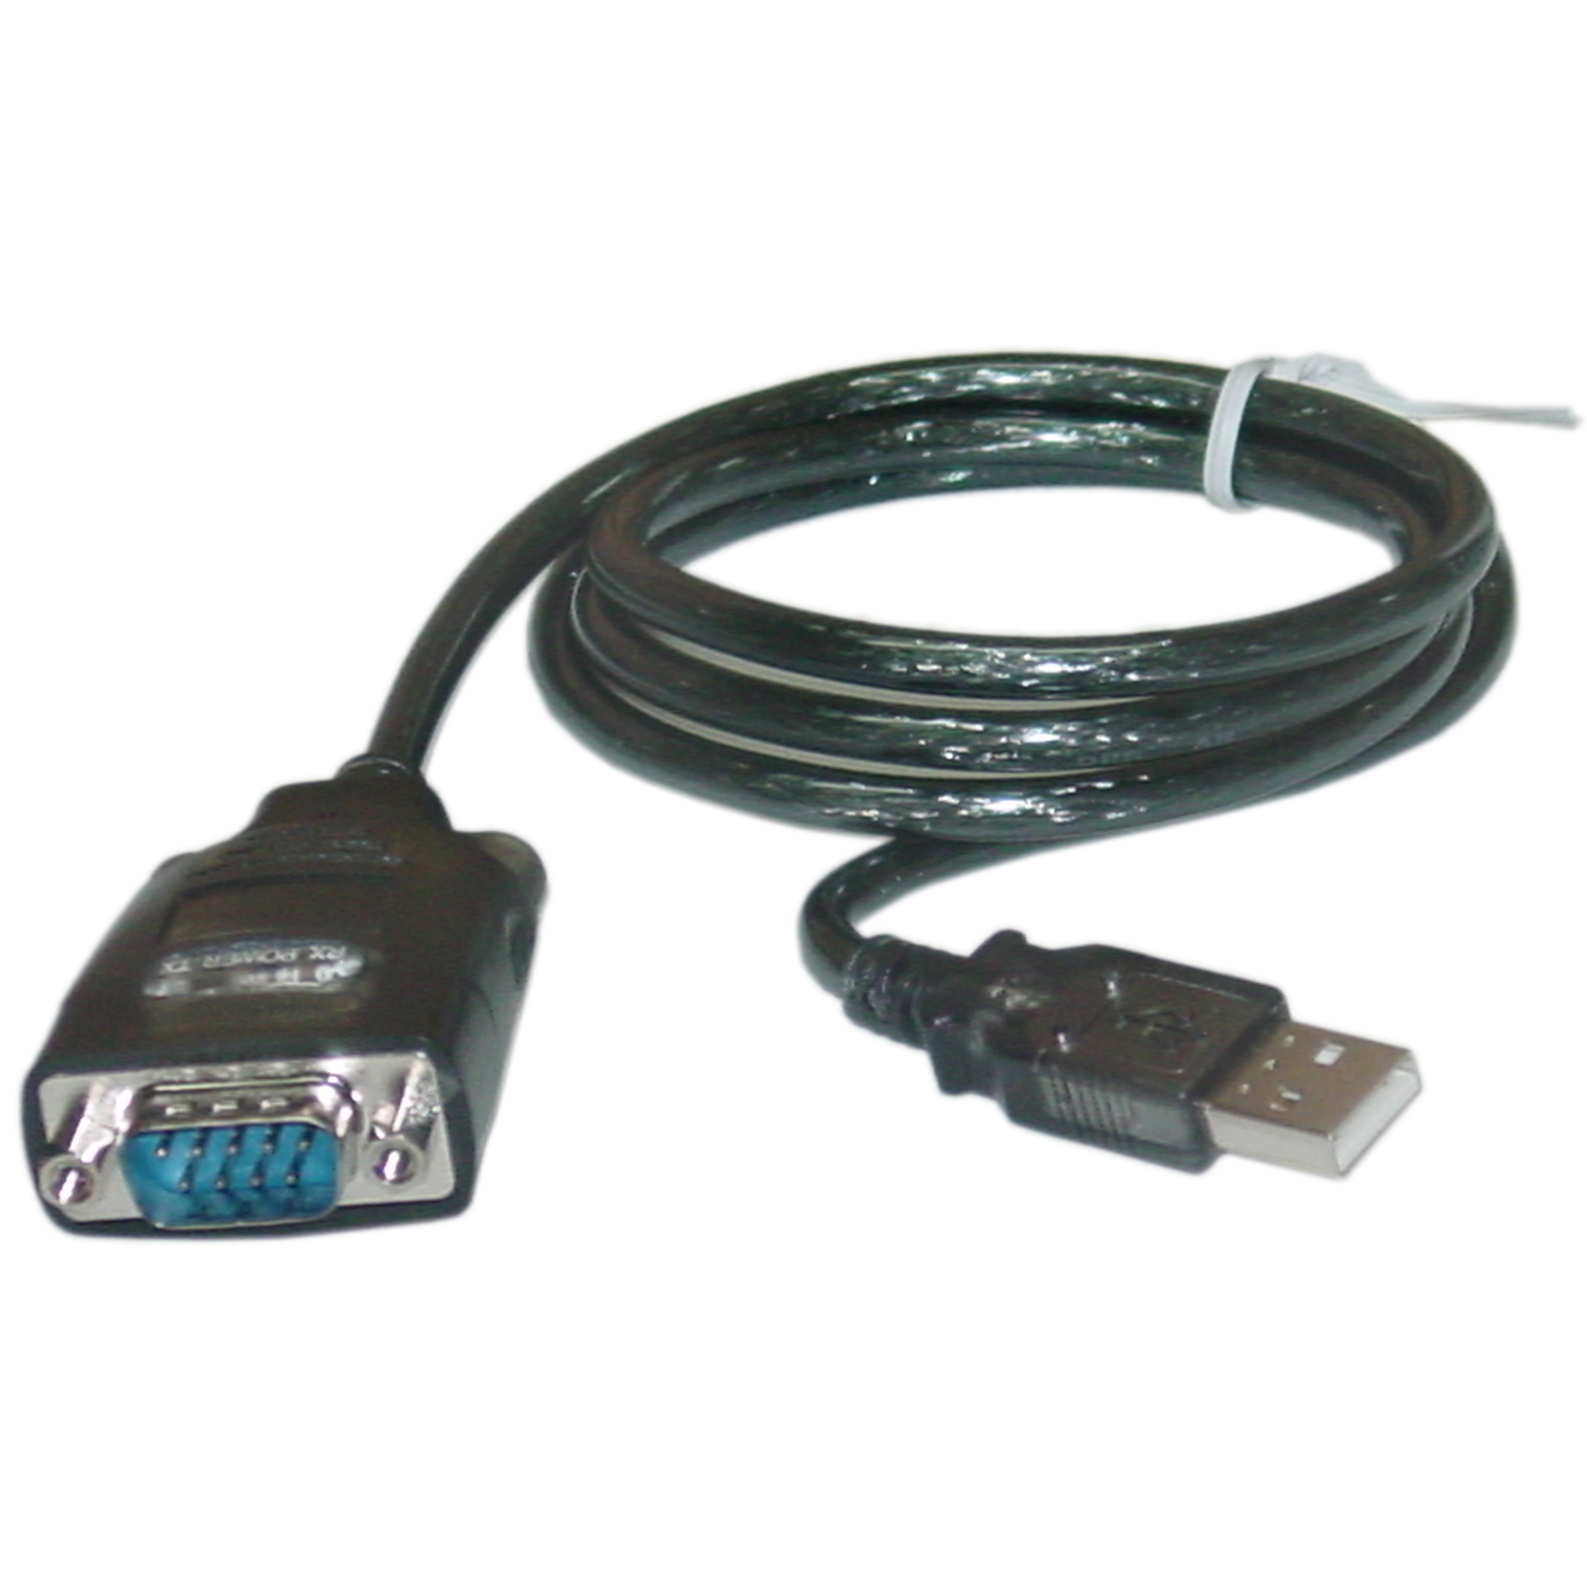 Usb to rs232 db9 driver